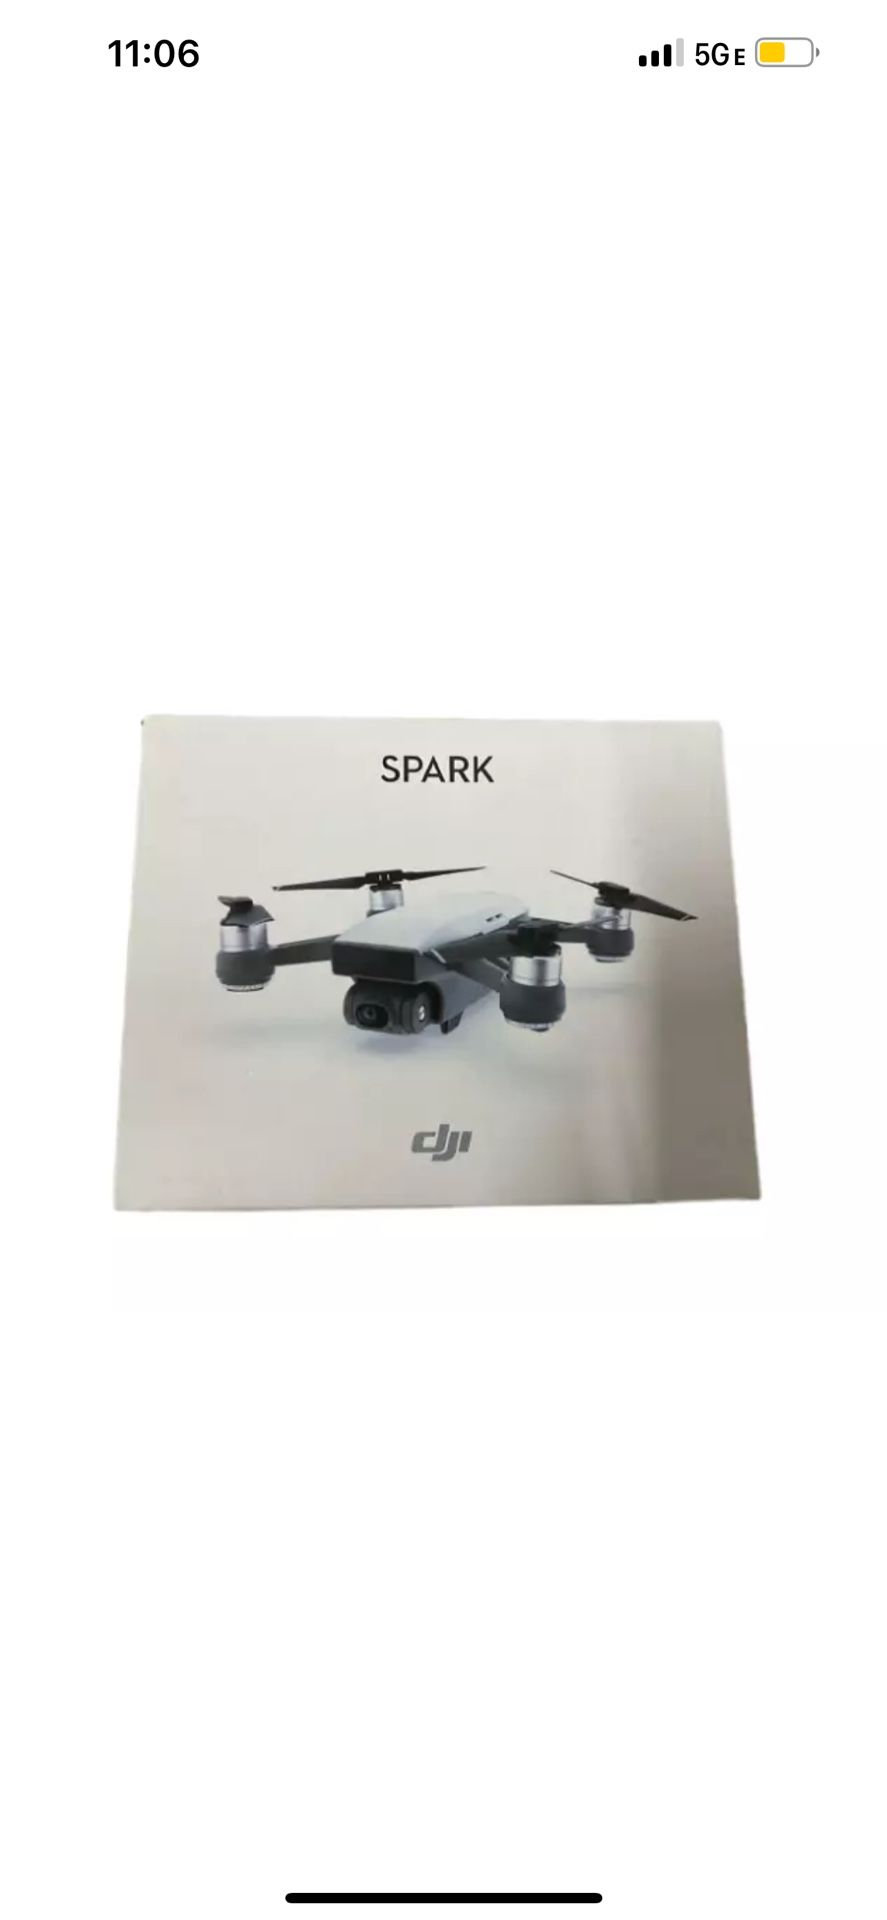 DJI Spark Red Air Fly Drone Camera excellent+++ condition no used